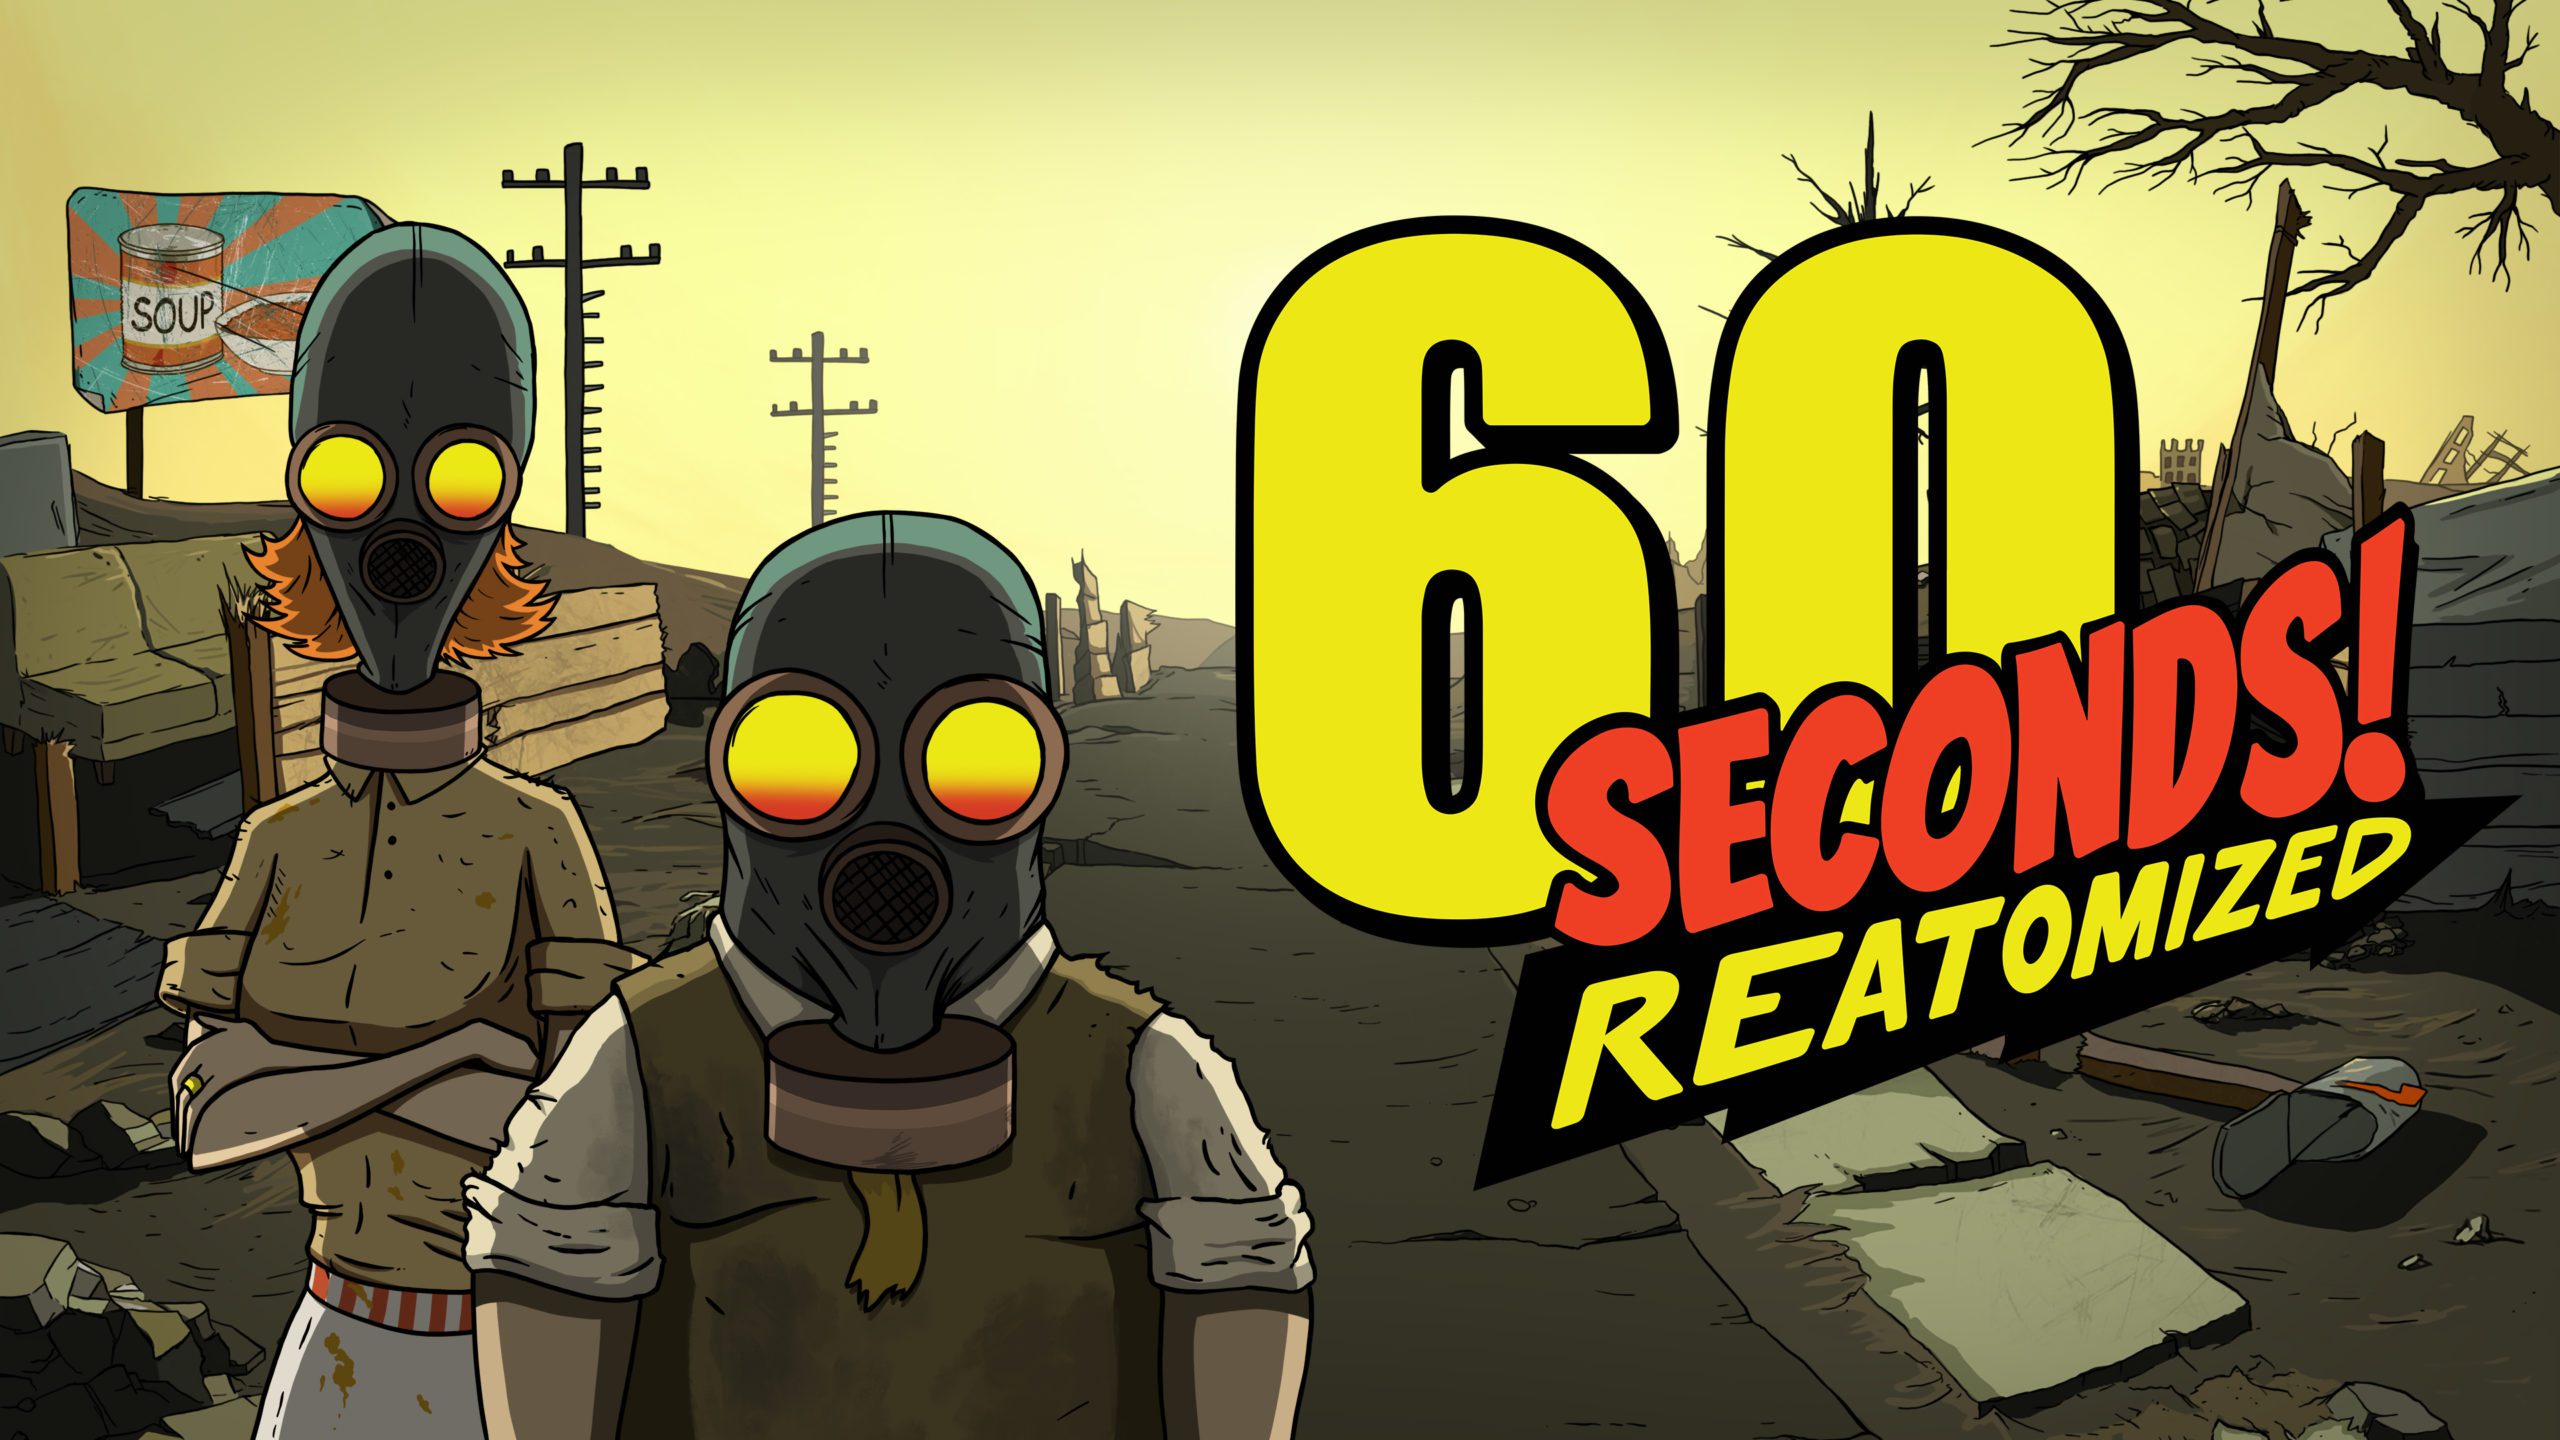 60 Seconds Reatomized Scaled 